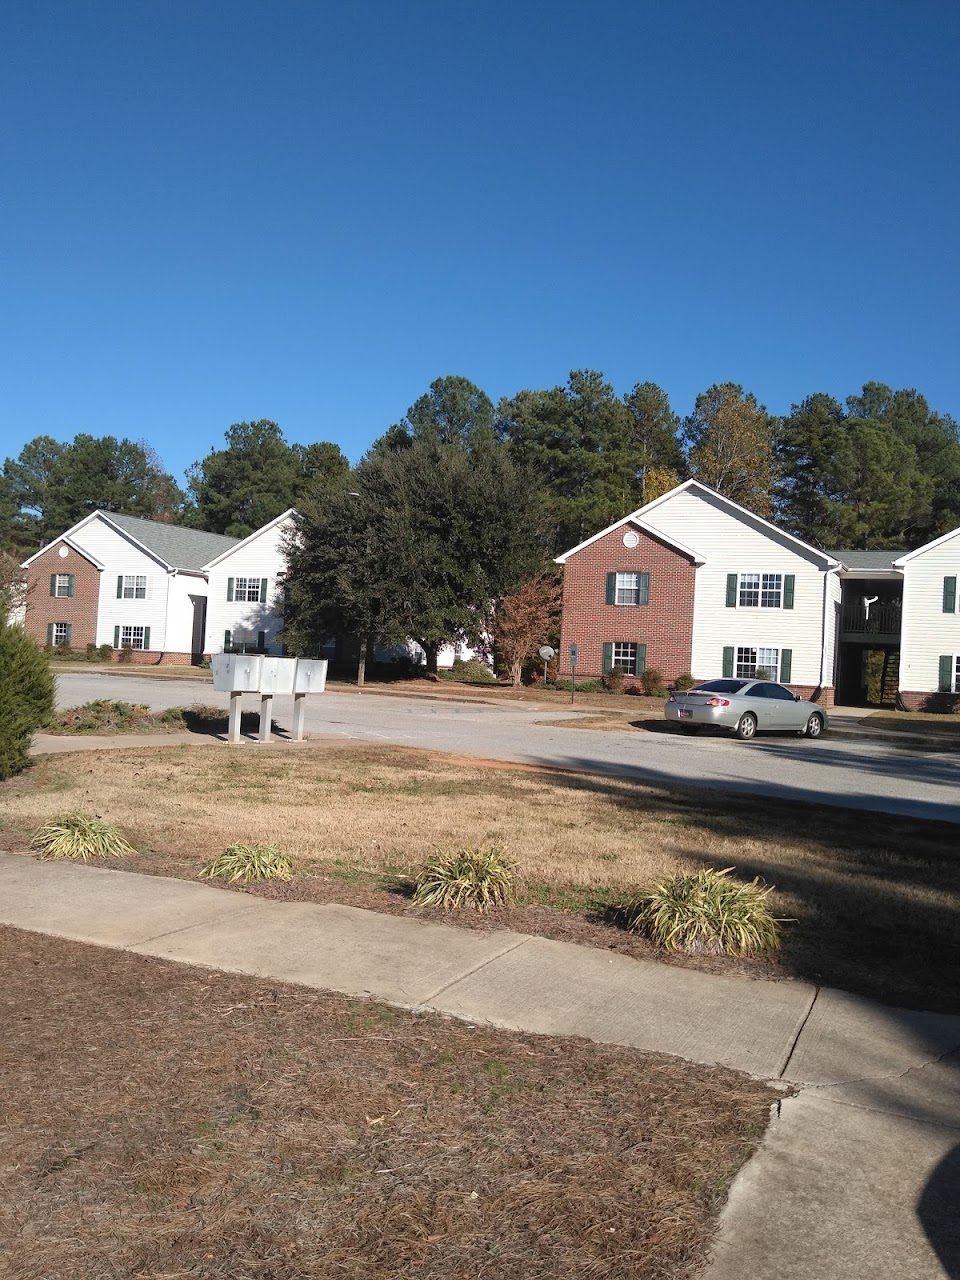 Photo of ROSE HILL GARDENS APTS. Affordable housing located at 175 INDUSTRIAL PARK RD UNION, SC 29379